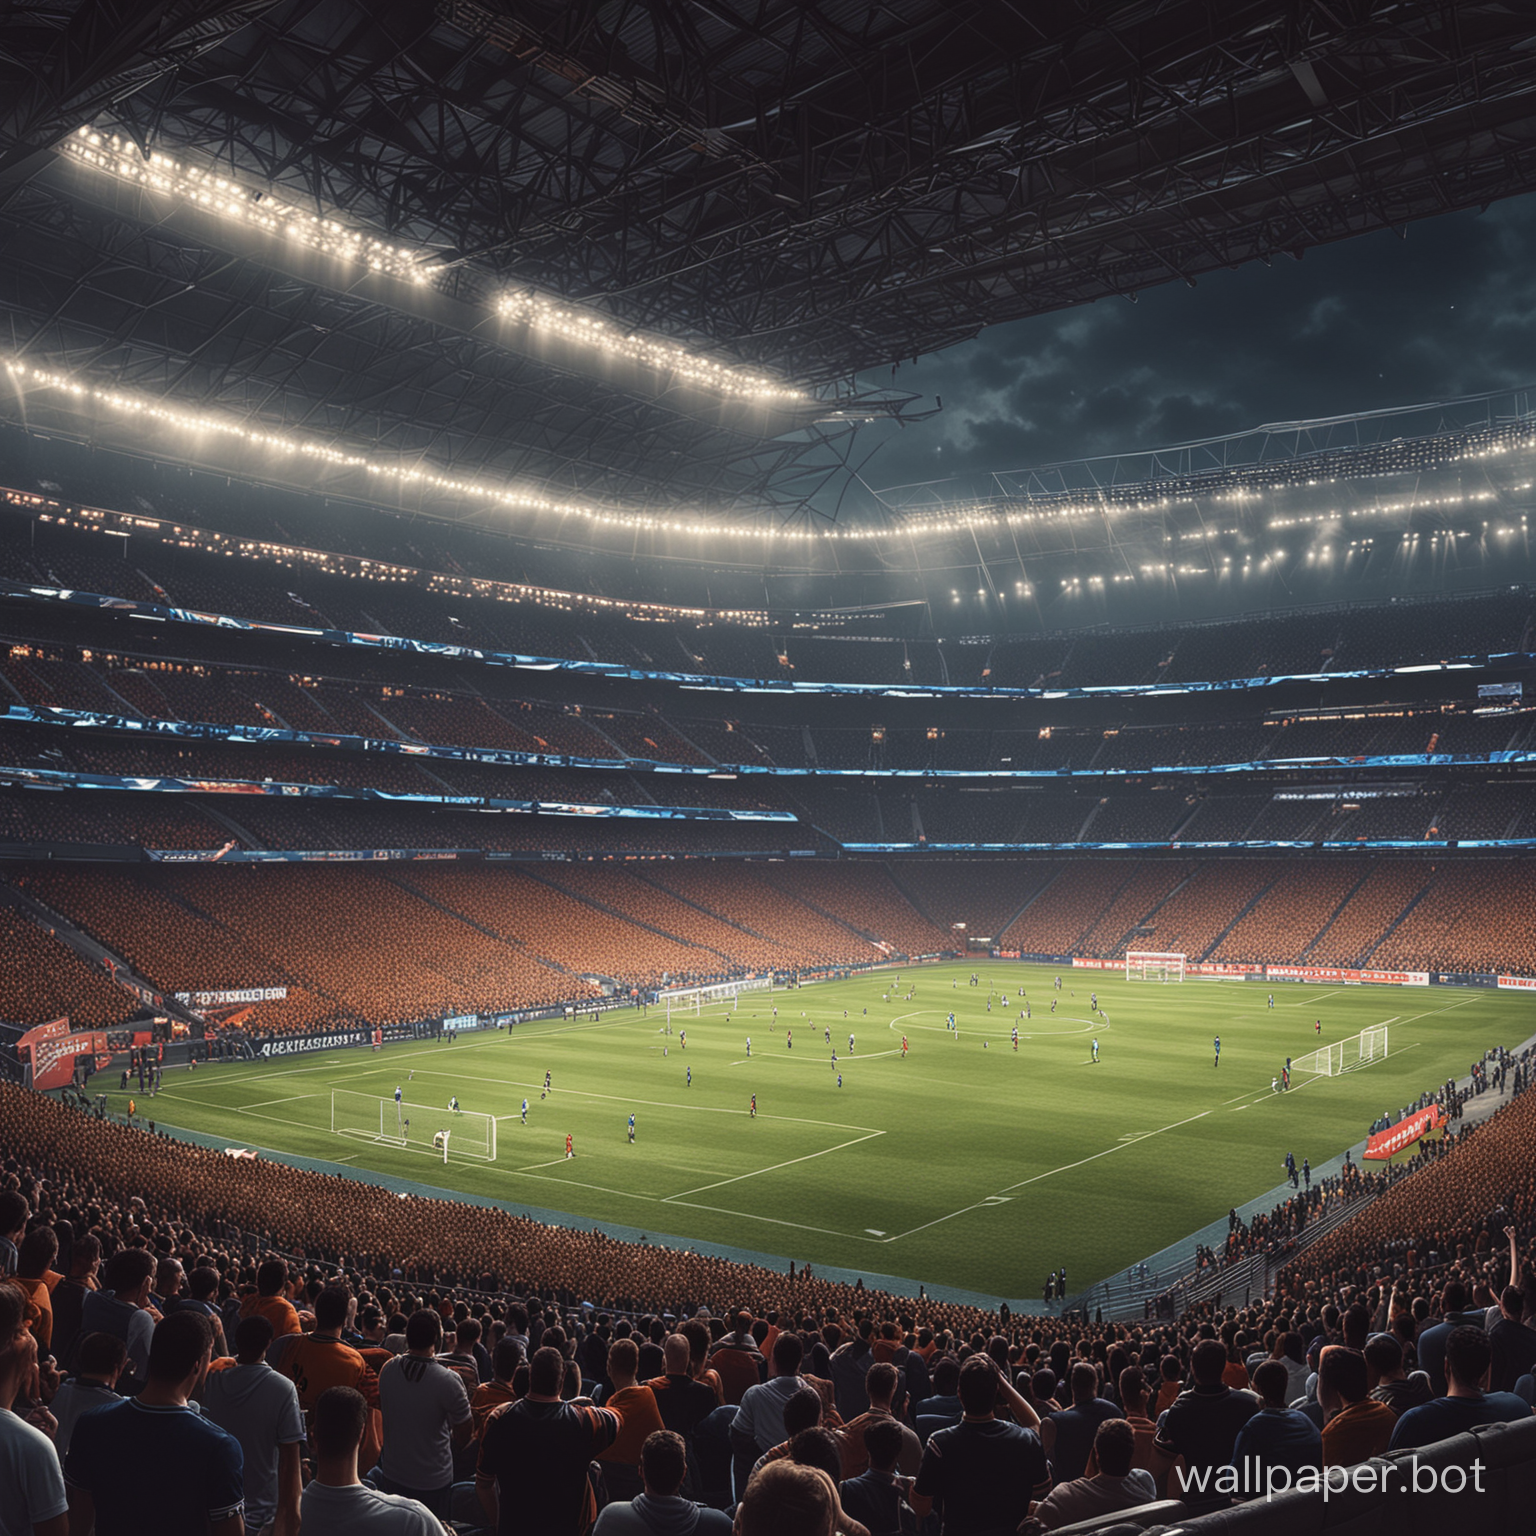 Realistic football stadium scene, high detail, cinematic, dynamic lighting, crowded stands, UHD resolution, detailed architecture, digital painting, sports, stadium design, epic atmosphere, vibrant colors, by top artists in sports illustration, excellent composition, immersive experience